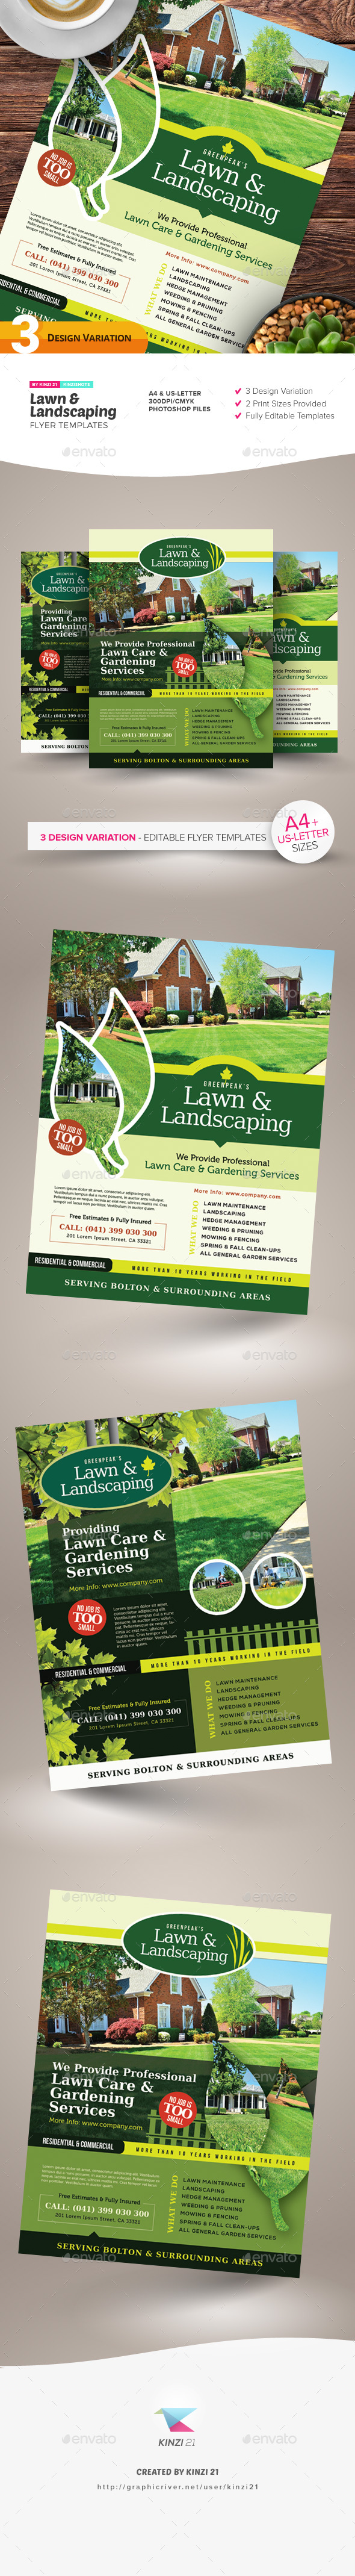 Lawn & Landscaping Flyer Templates